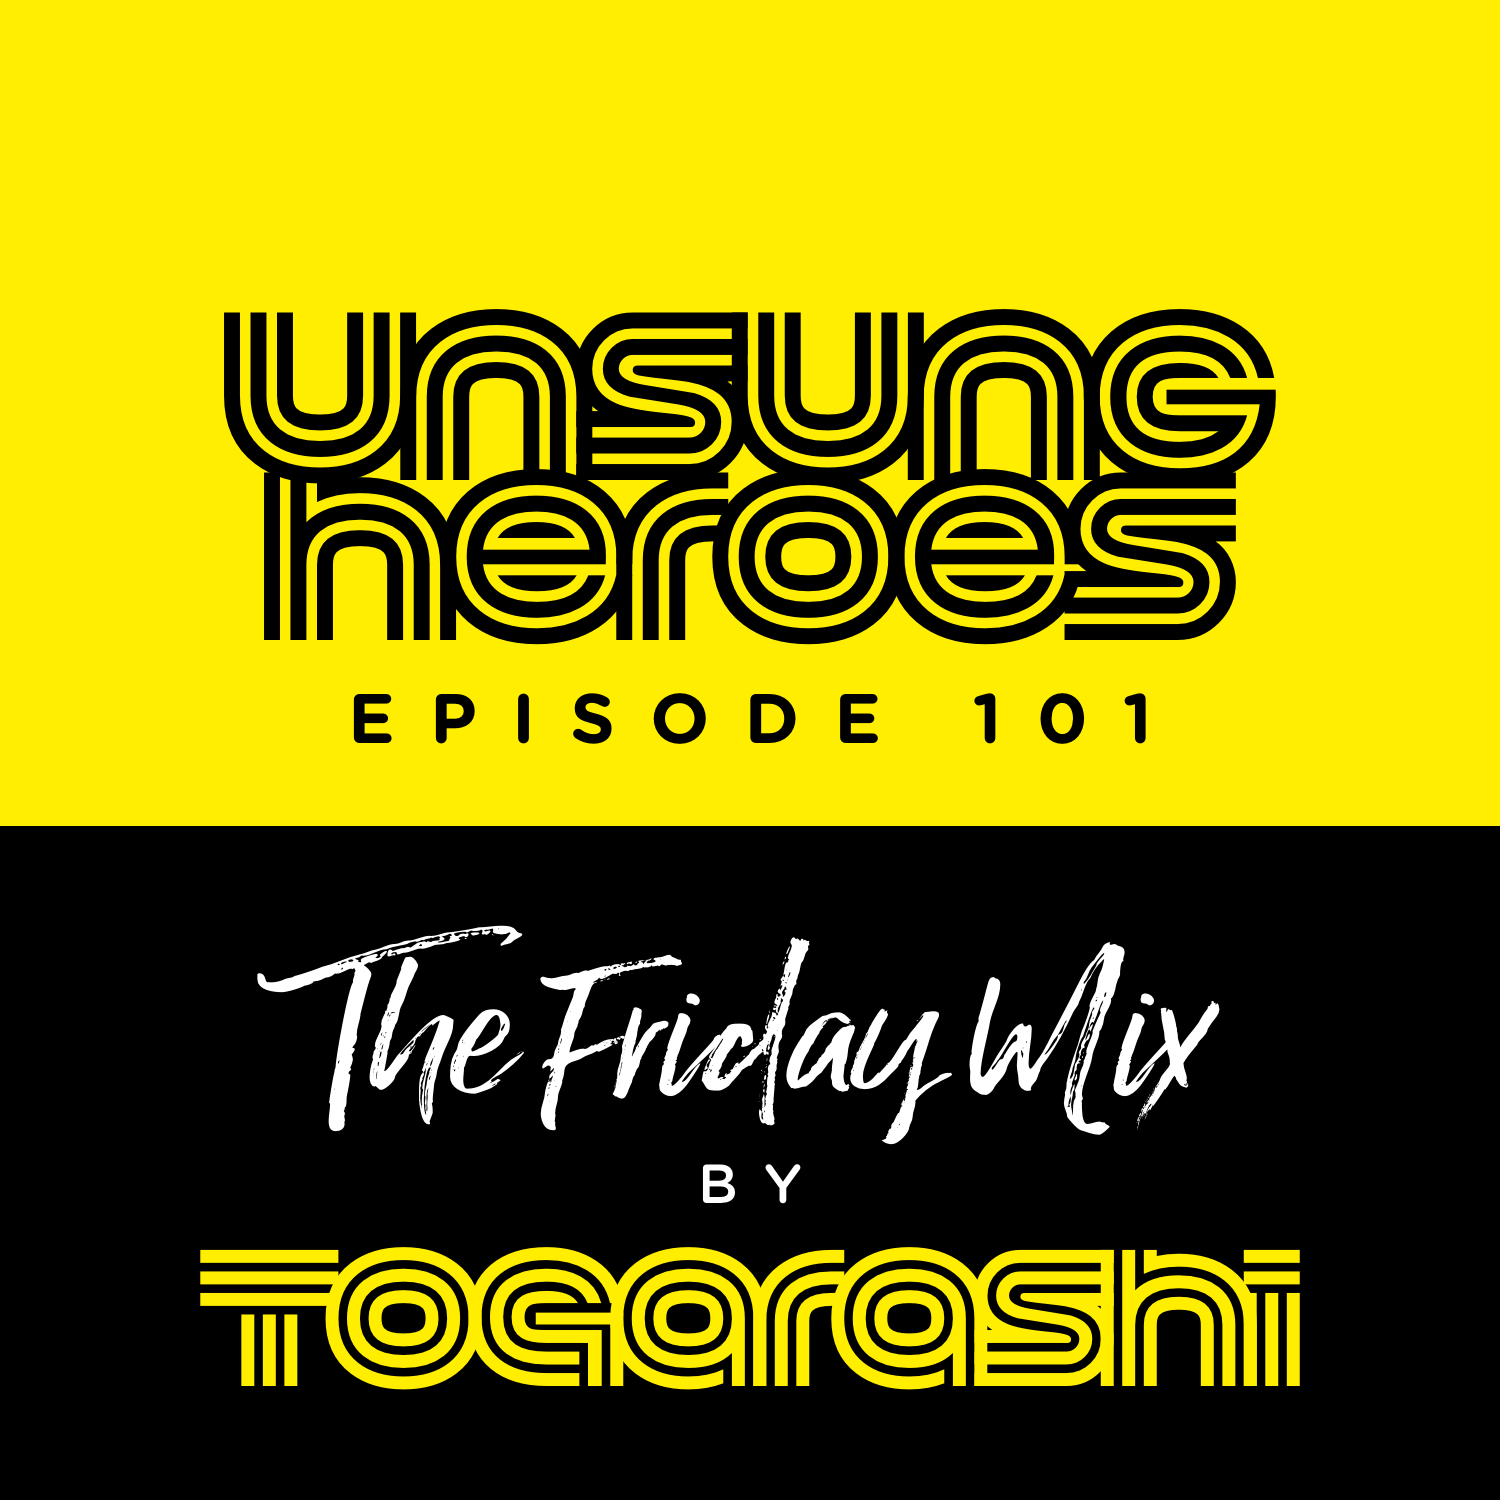 #101 Unsung Heroes